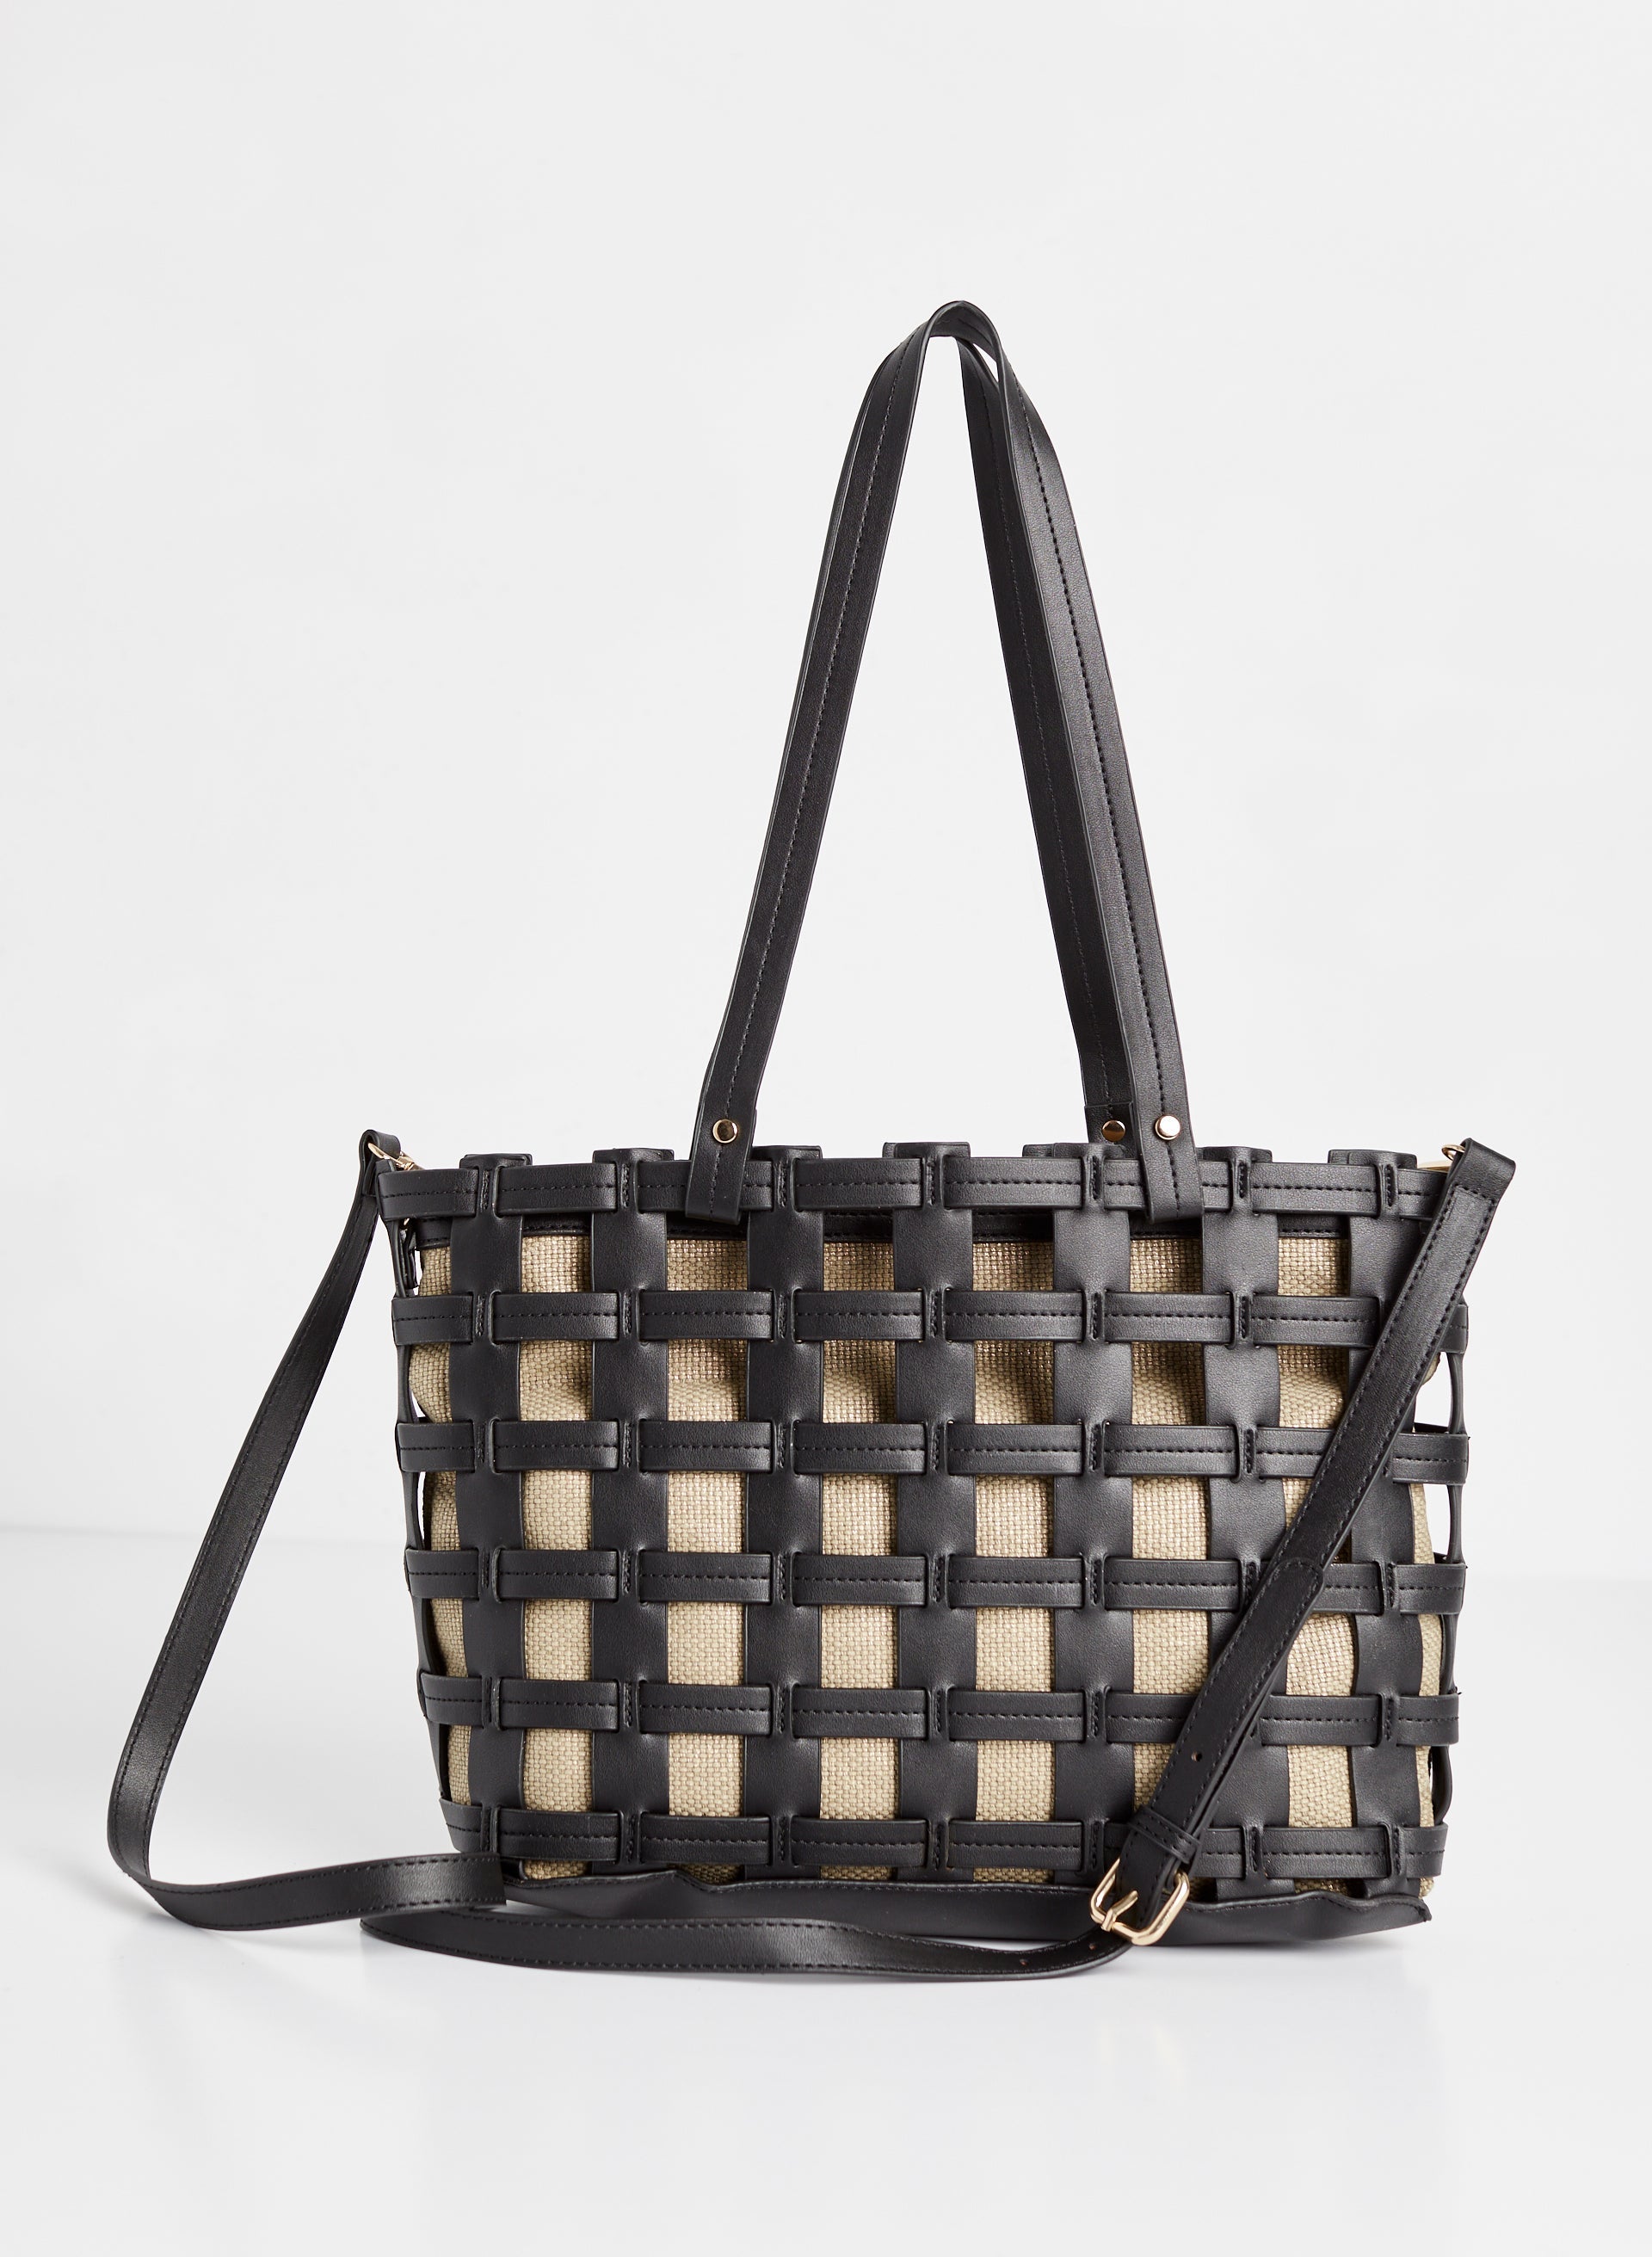 Open Weave Tote Bag